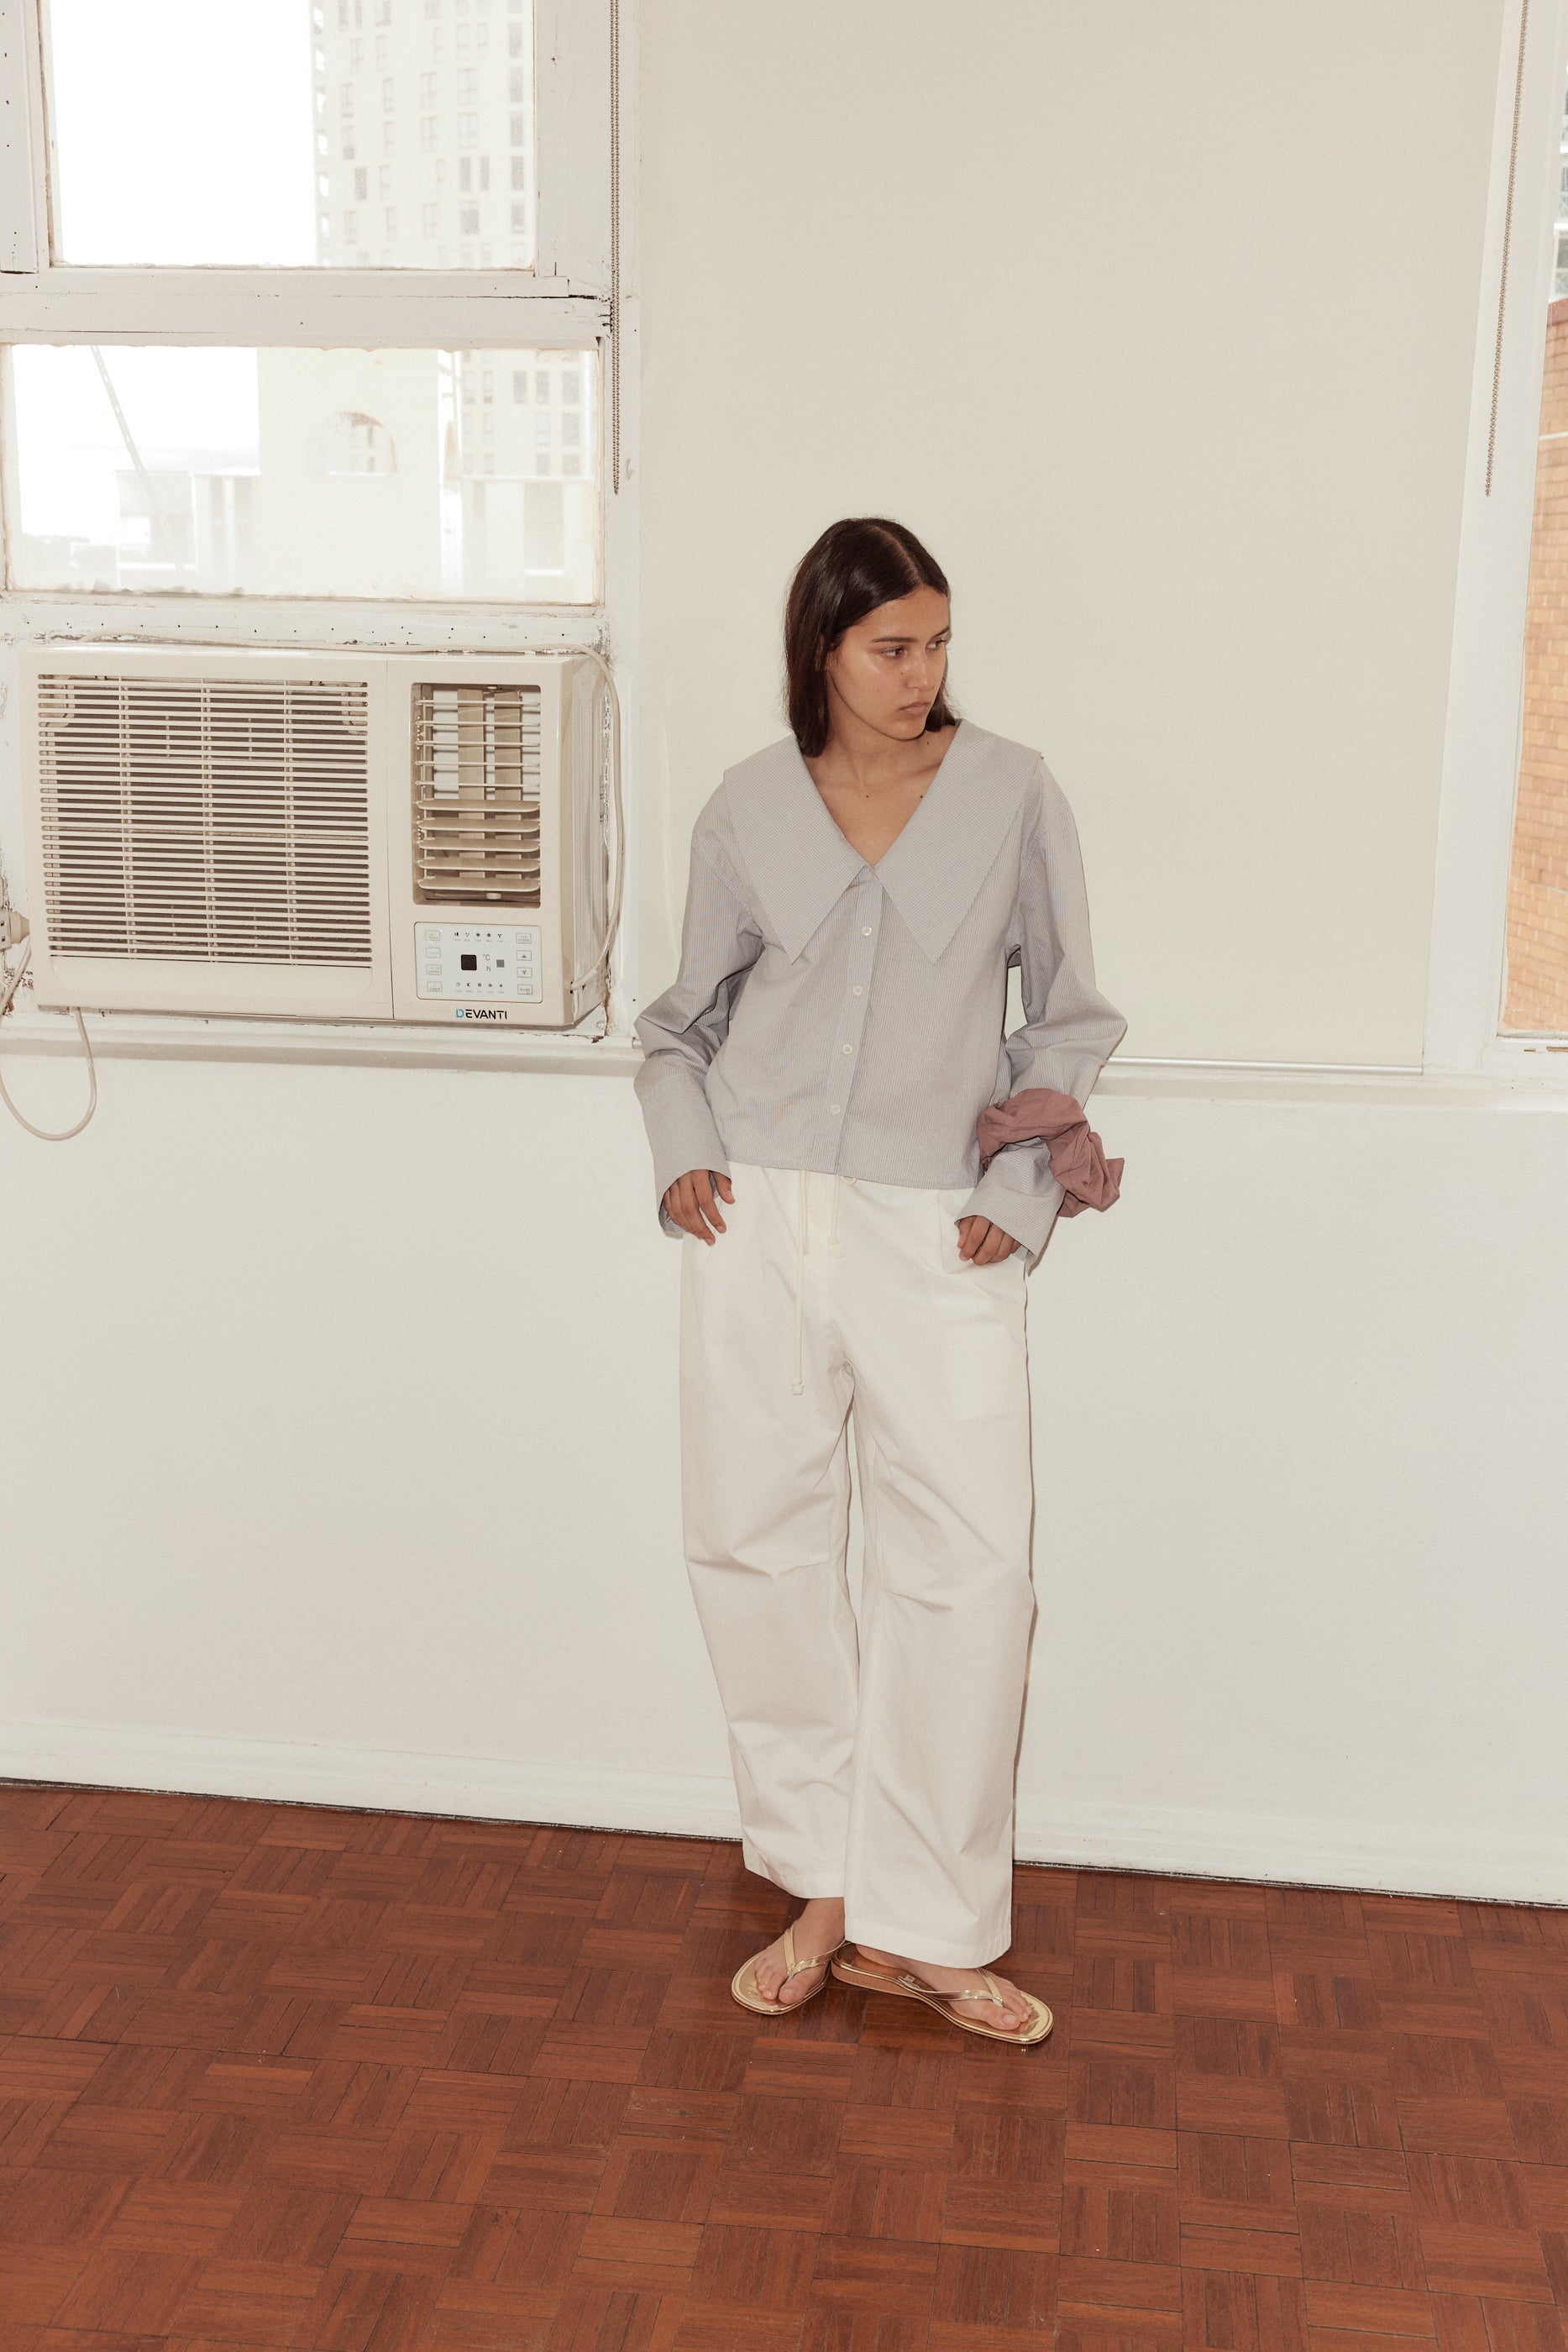 Long shot of female model wearing the Oversized Collared Shirt in Dream Stripe, Bartack Pants in White. Styled with gold flip flops and scrunchie worn on wrist. Model stands in from of an old air conditioner lodged in the wall.